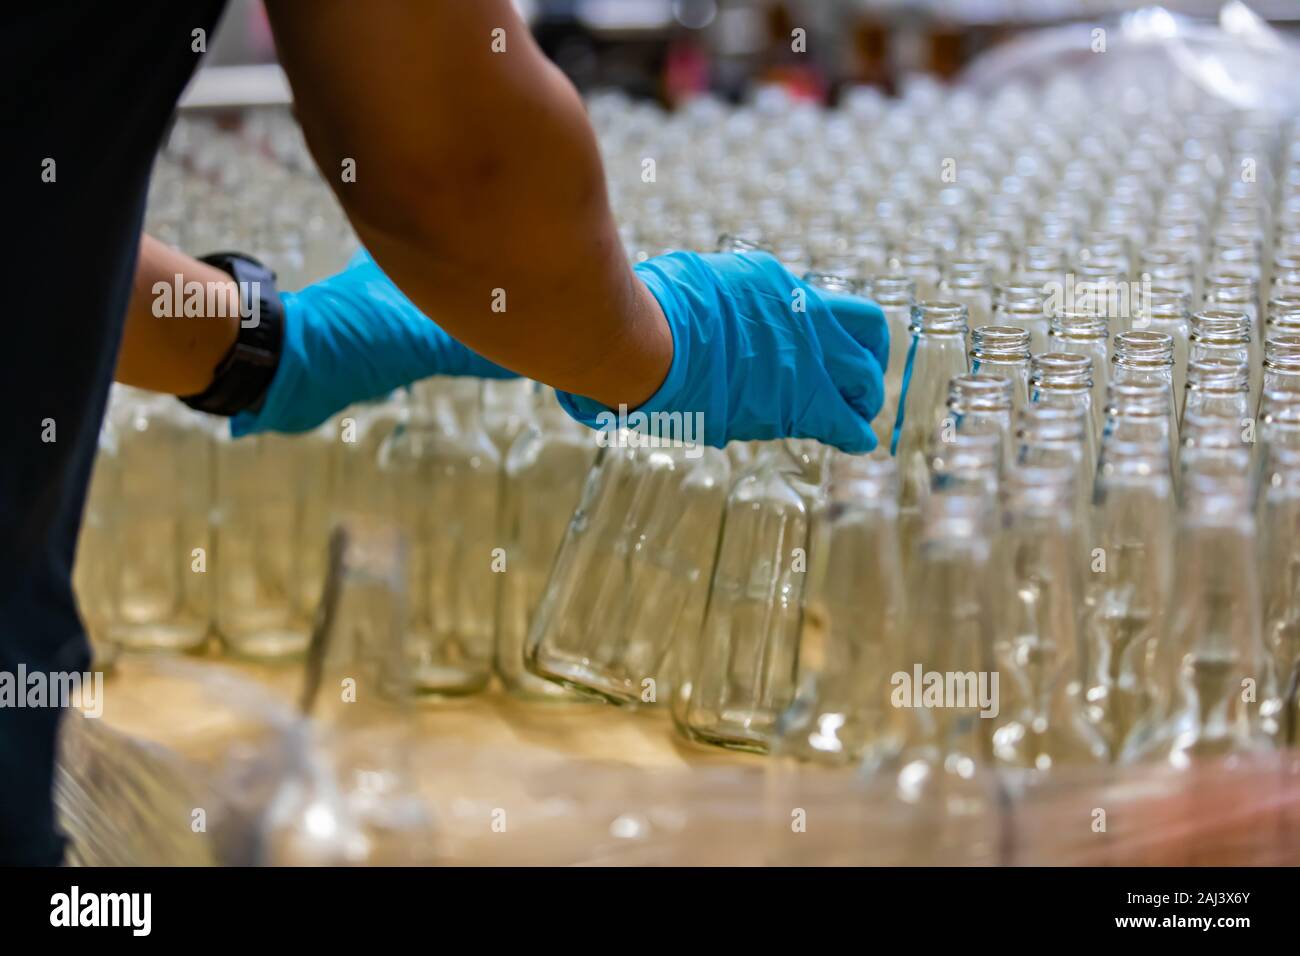 a lot of new beer white glass empty bottle, person hands with blue Rubber glove holding bottles, selective focus close up view Stock Photo